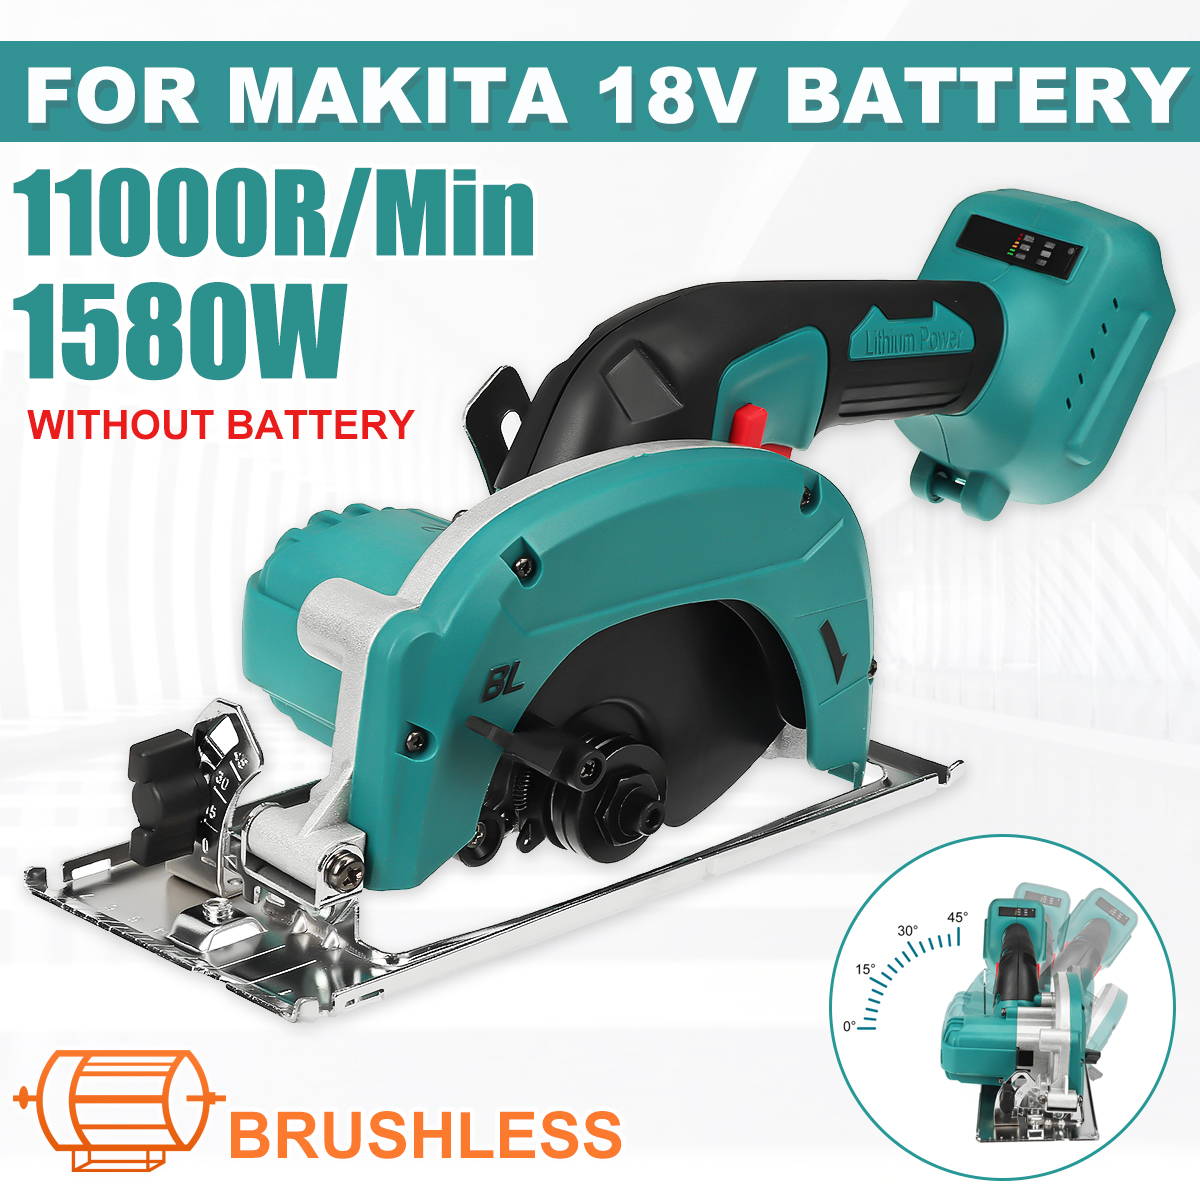 132150mm-Cordless-Electric-Circular-Saw-Curved-Cutting-Adjustable-Cut-Off-Saw-For-Woodworking-Fit-Ma-1924966-1